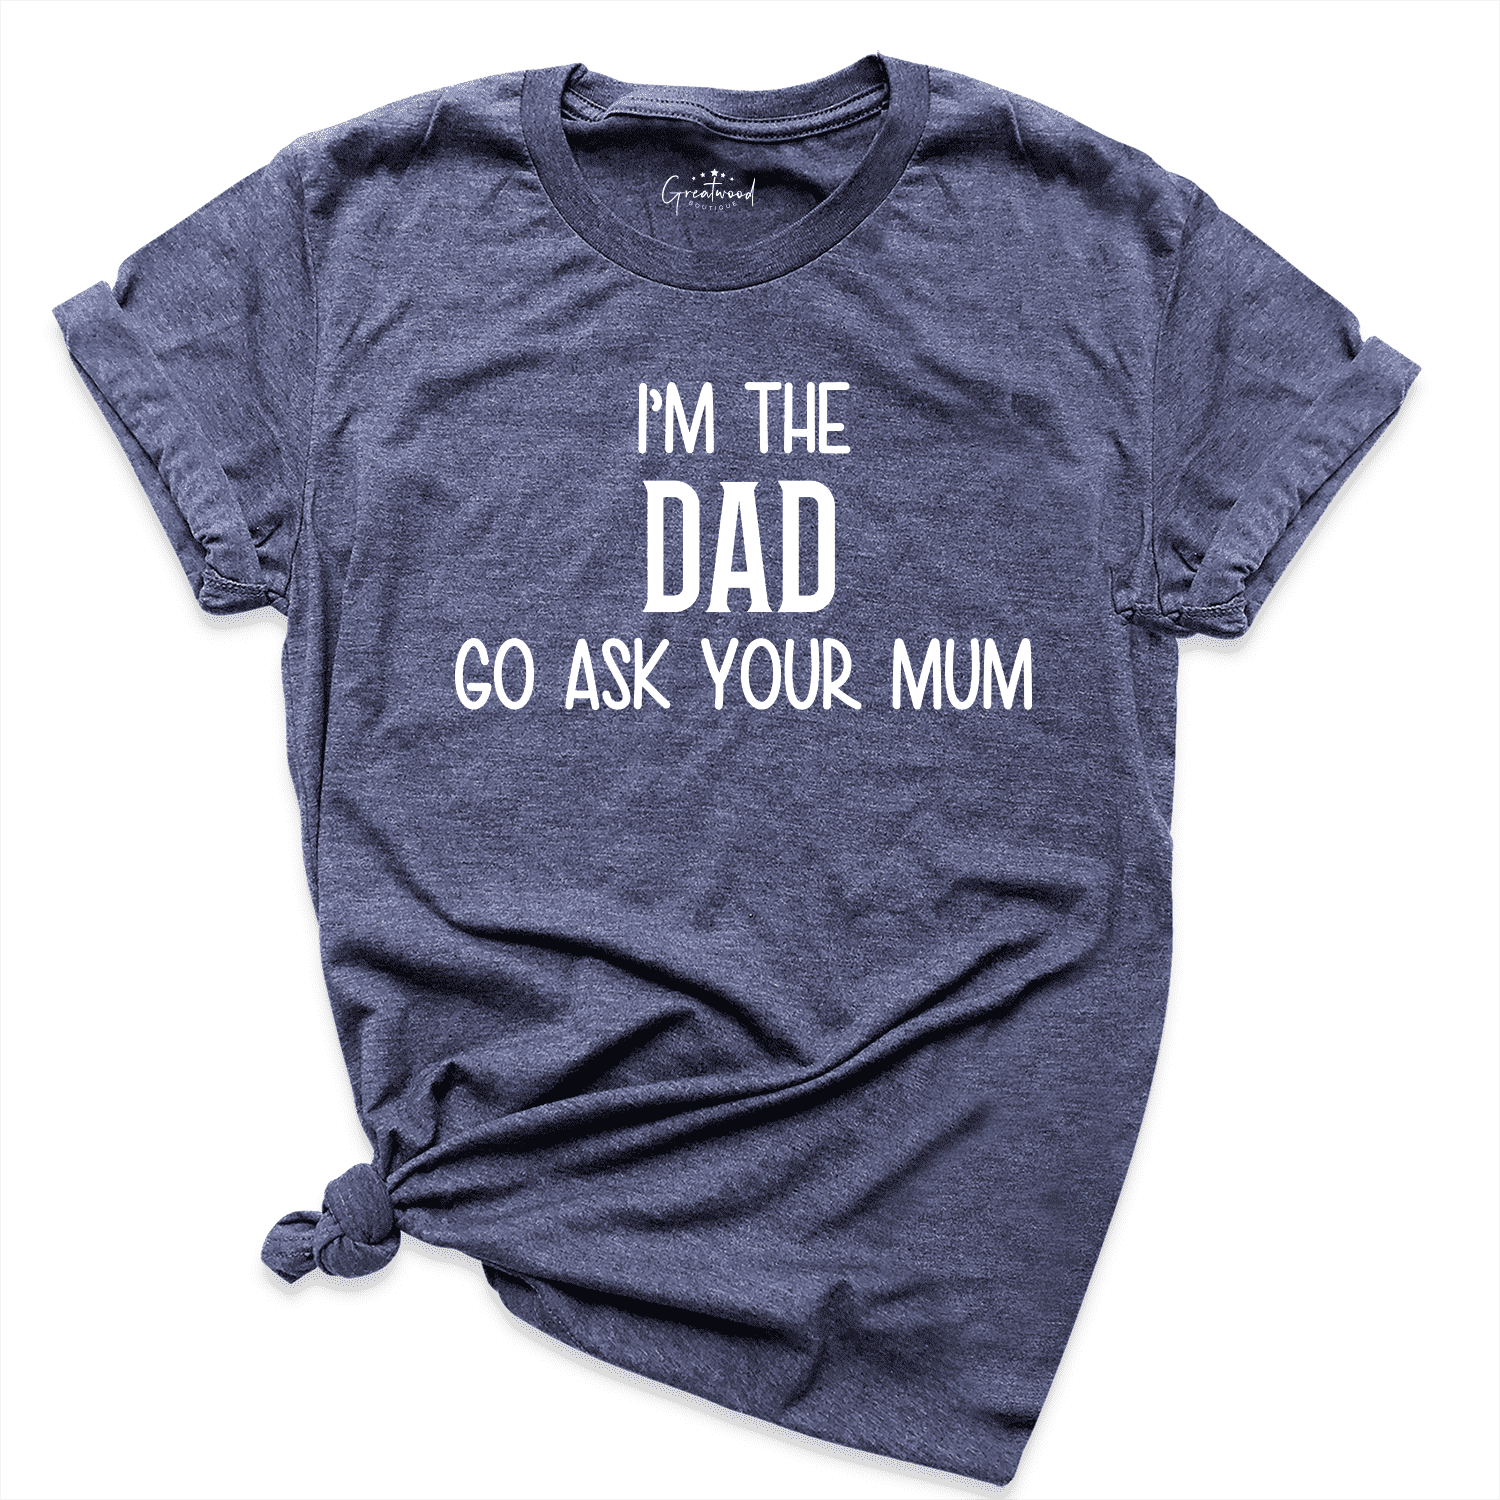 I'm The Dad Shirt Navy - Greatwood Boutique